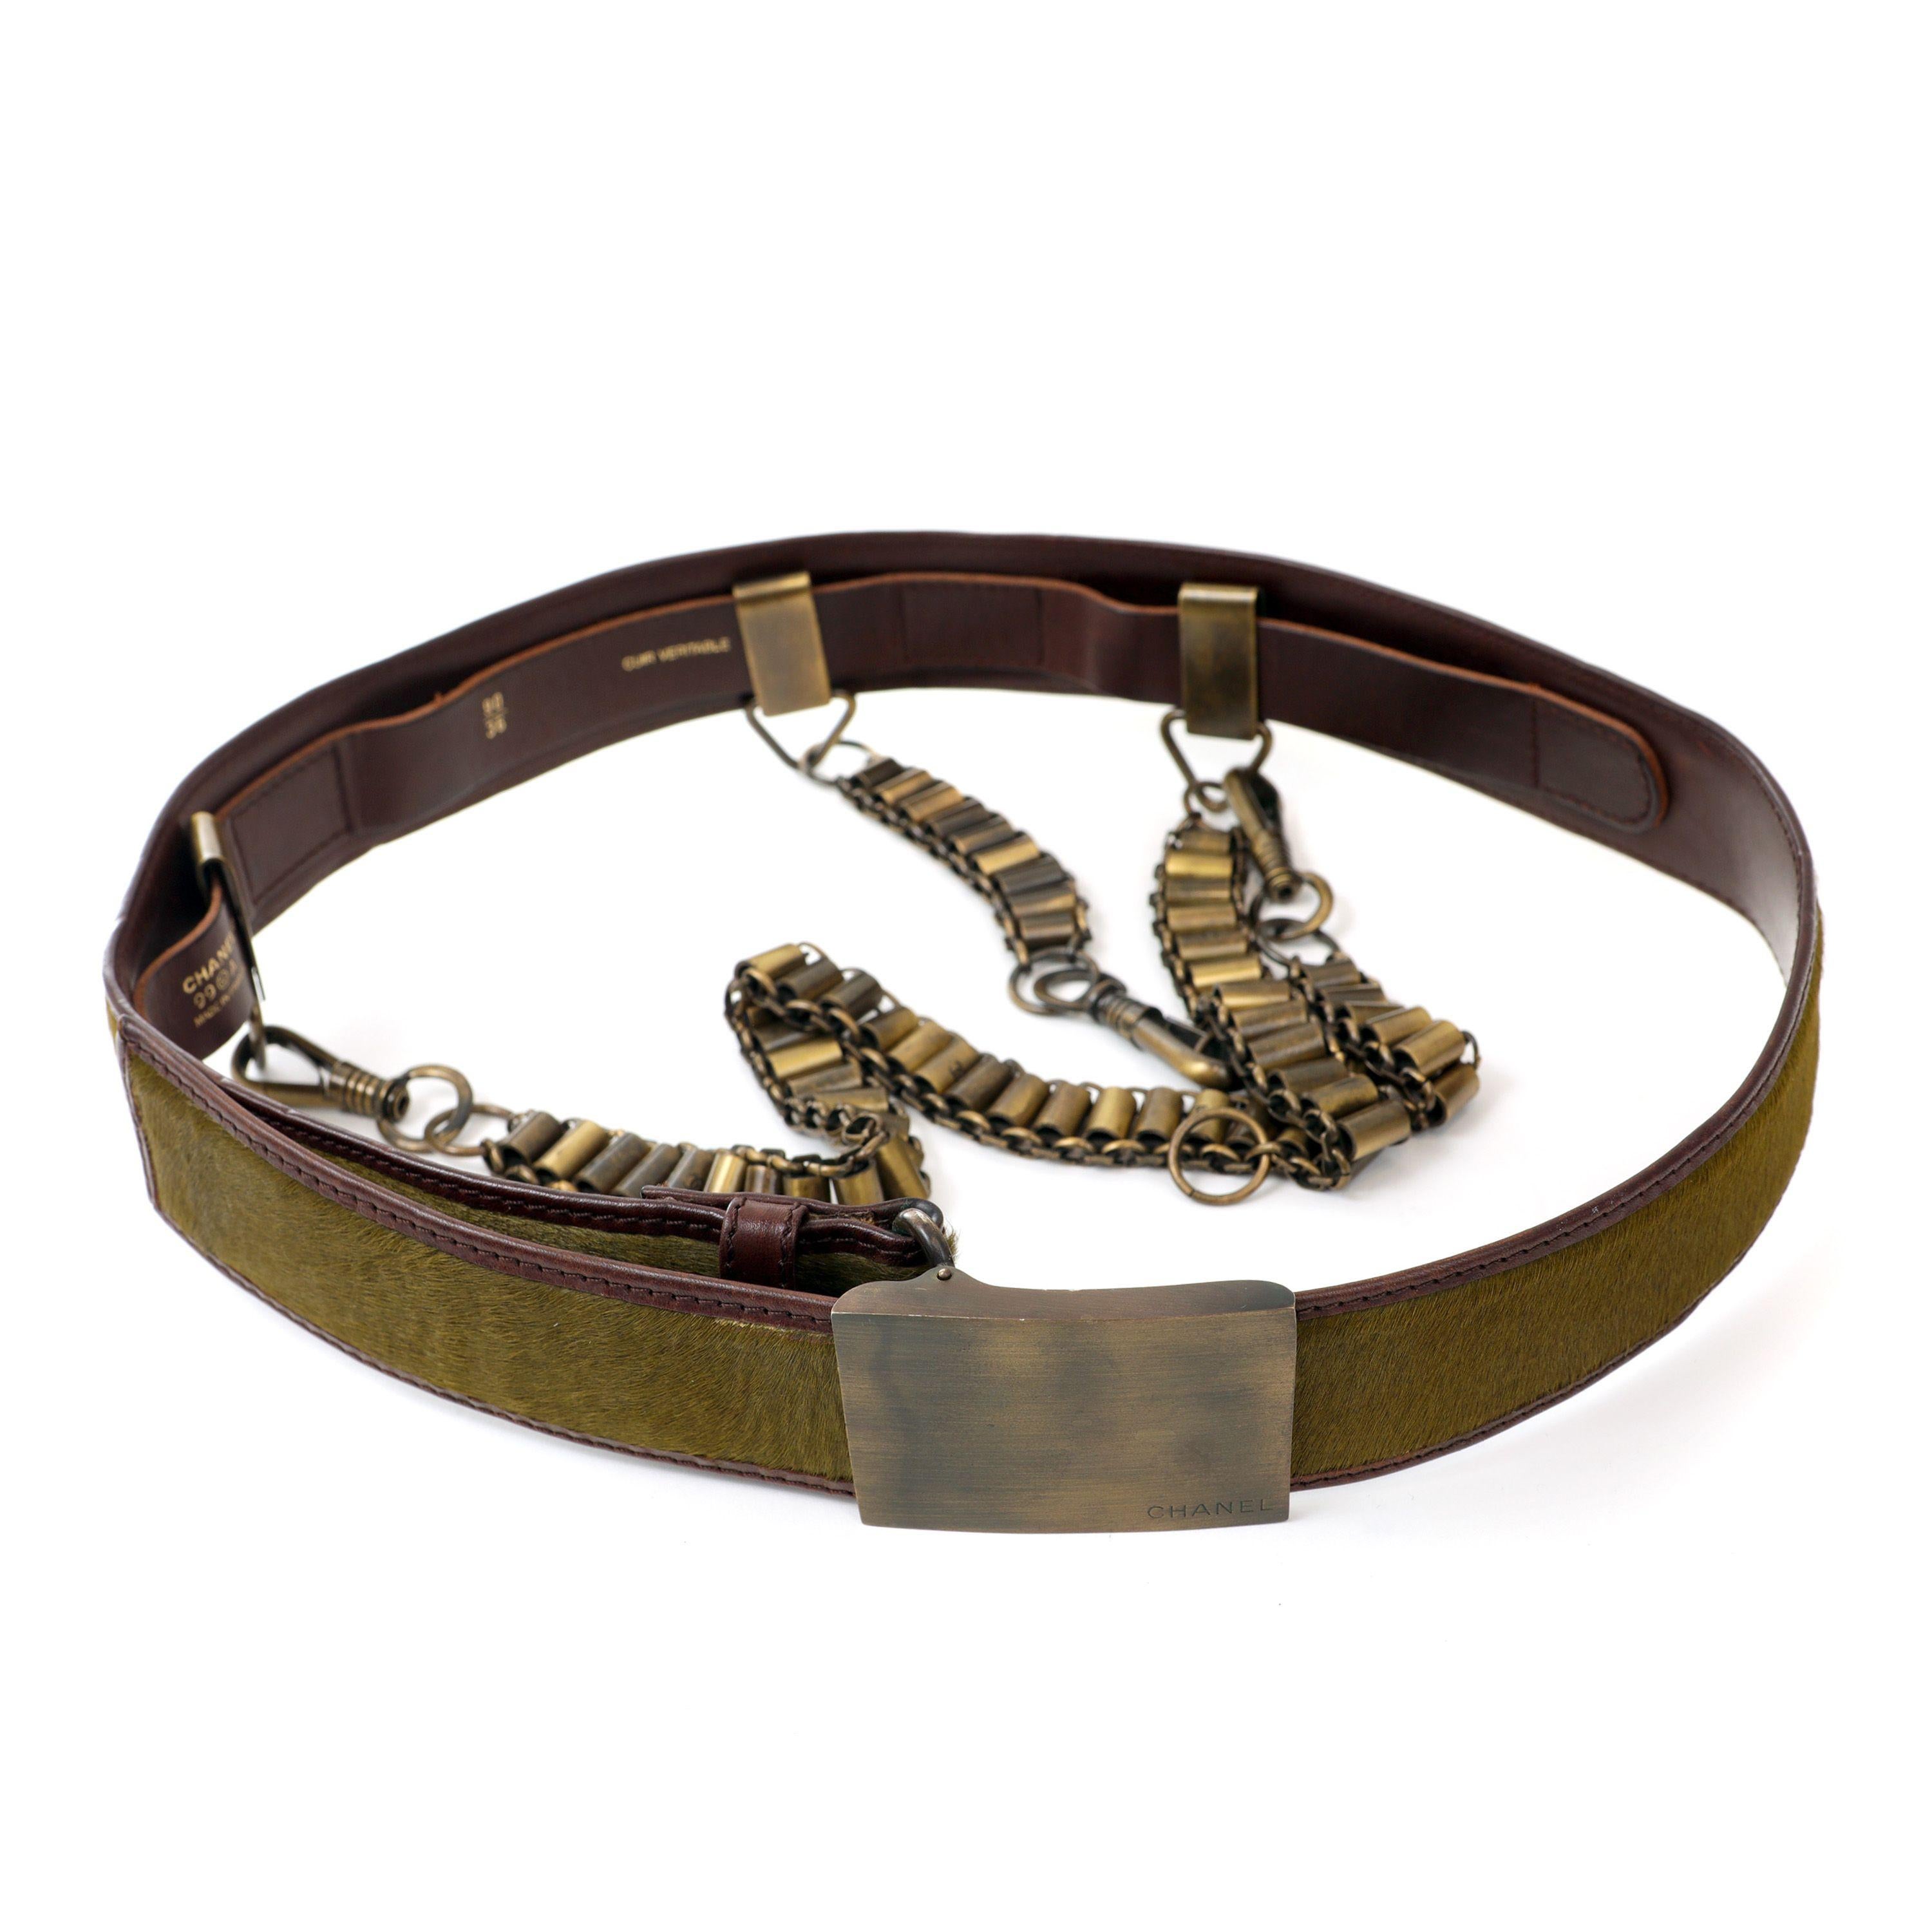 This authentic Chanel Green Pony Hair and Draped Chains Runway Belt is in excellent plus condition.  Extremely rare and collectible, this unique piece combines leather, metals and pony hair for maximum impact.

PBF 13138